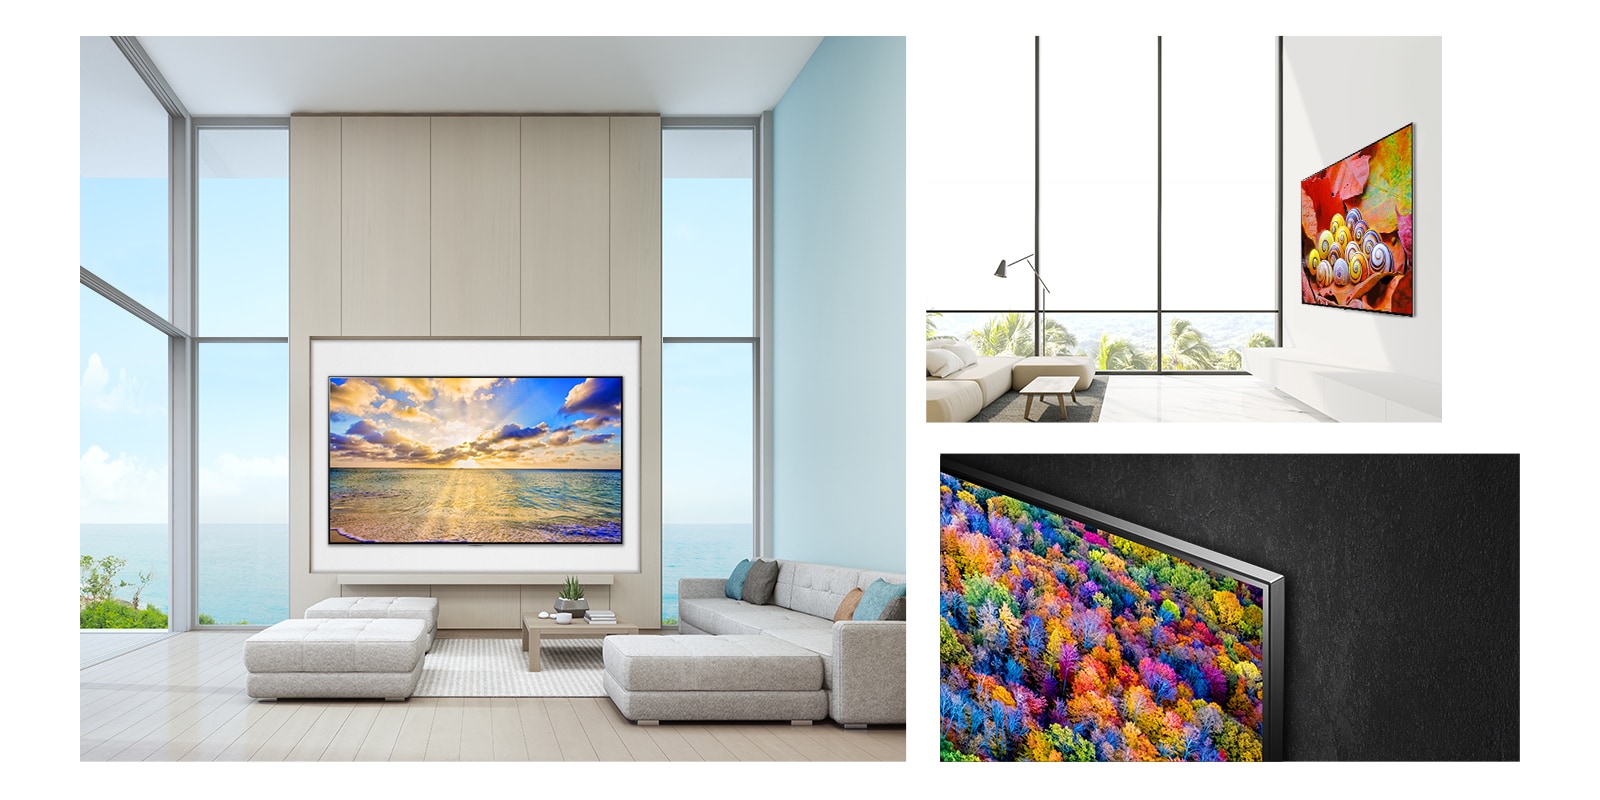 Three images depicting LG Gallery TV